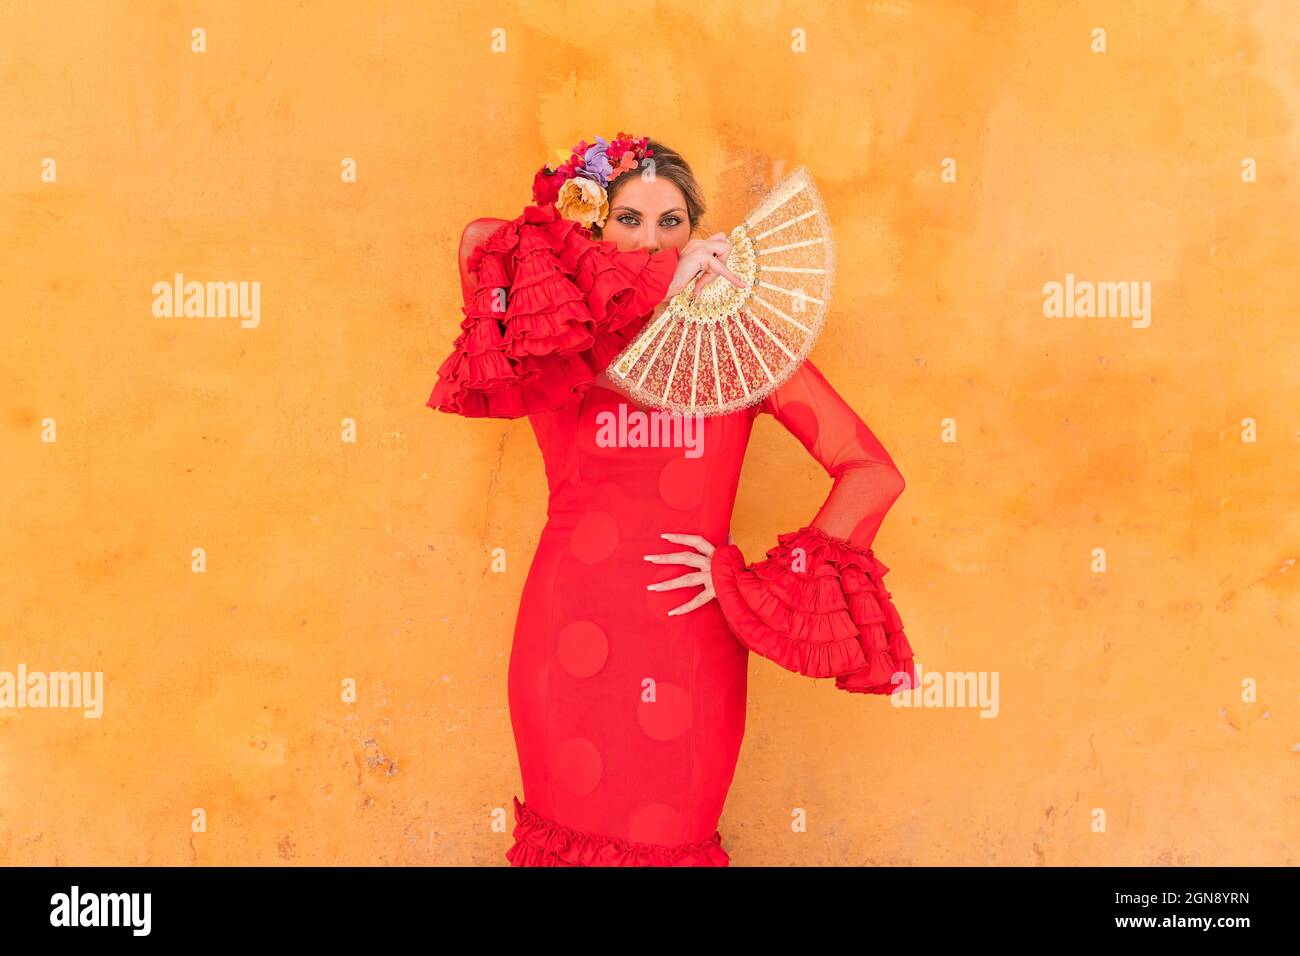 Female dancer wearing red traditional dress standing in front of orange wall Stock Photo